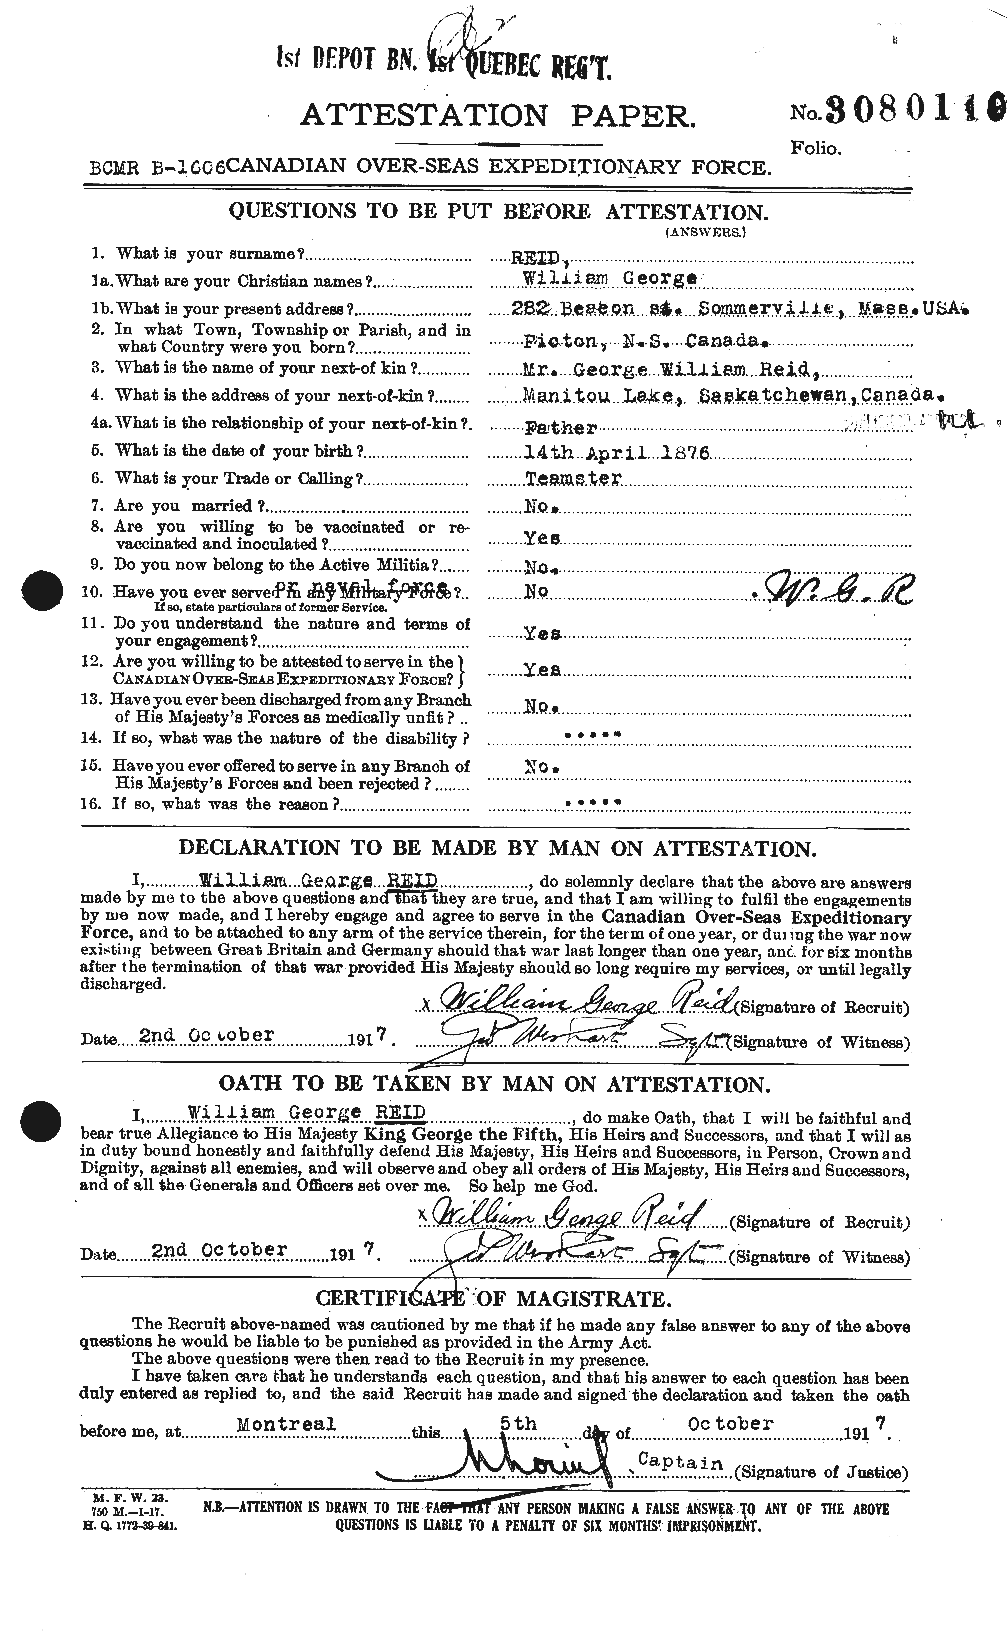 Personnel Records of the First World War - CEF 596988a